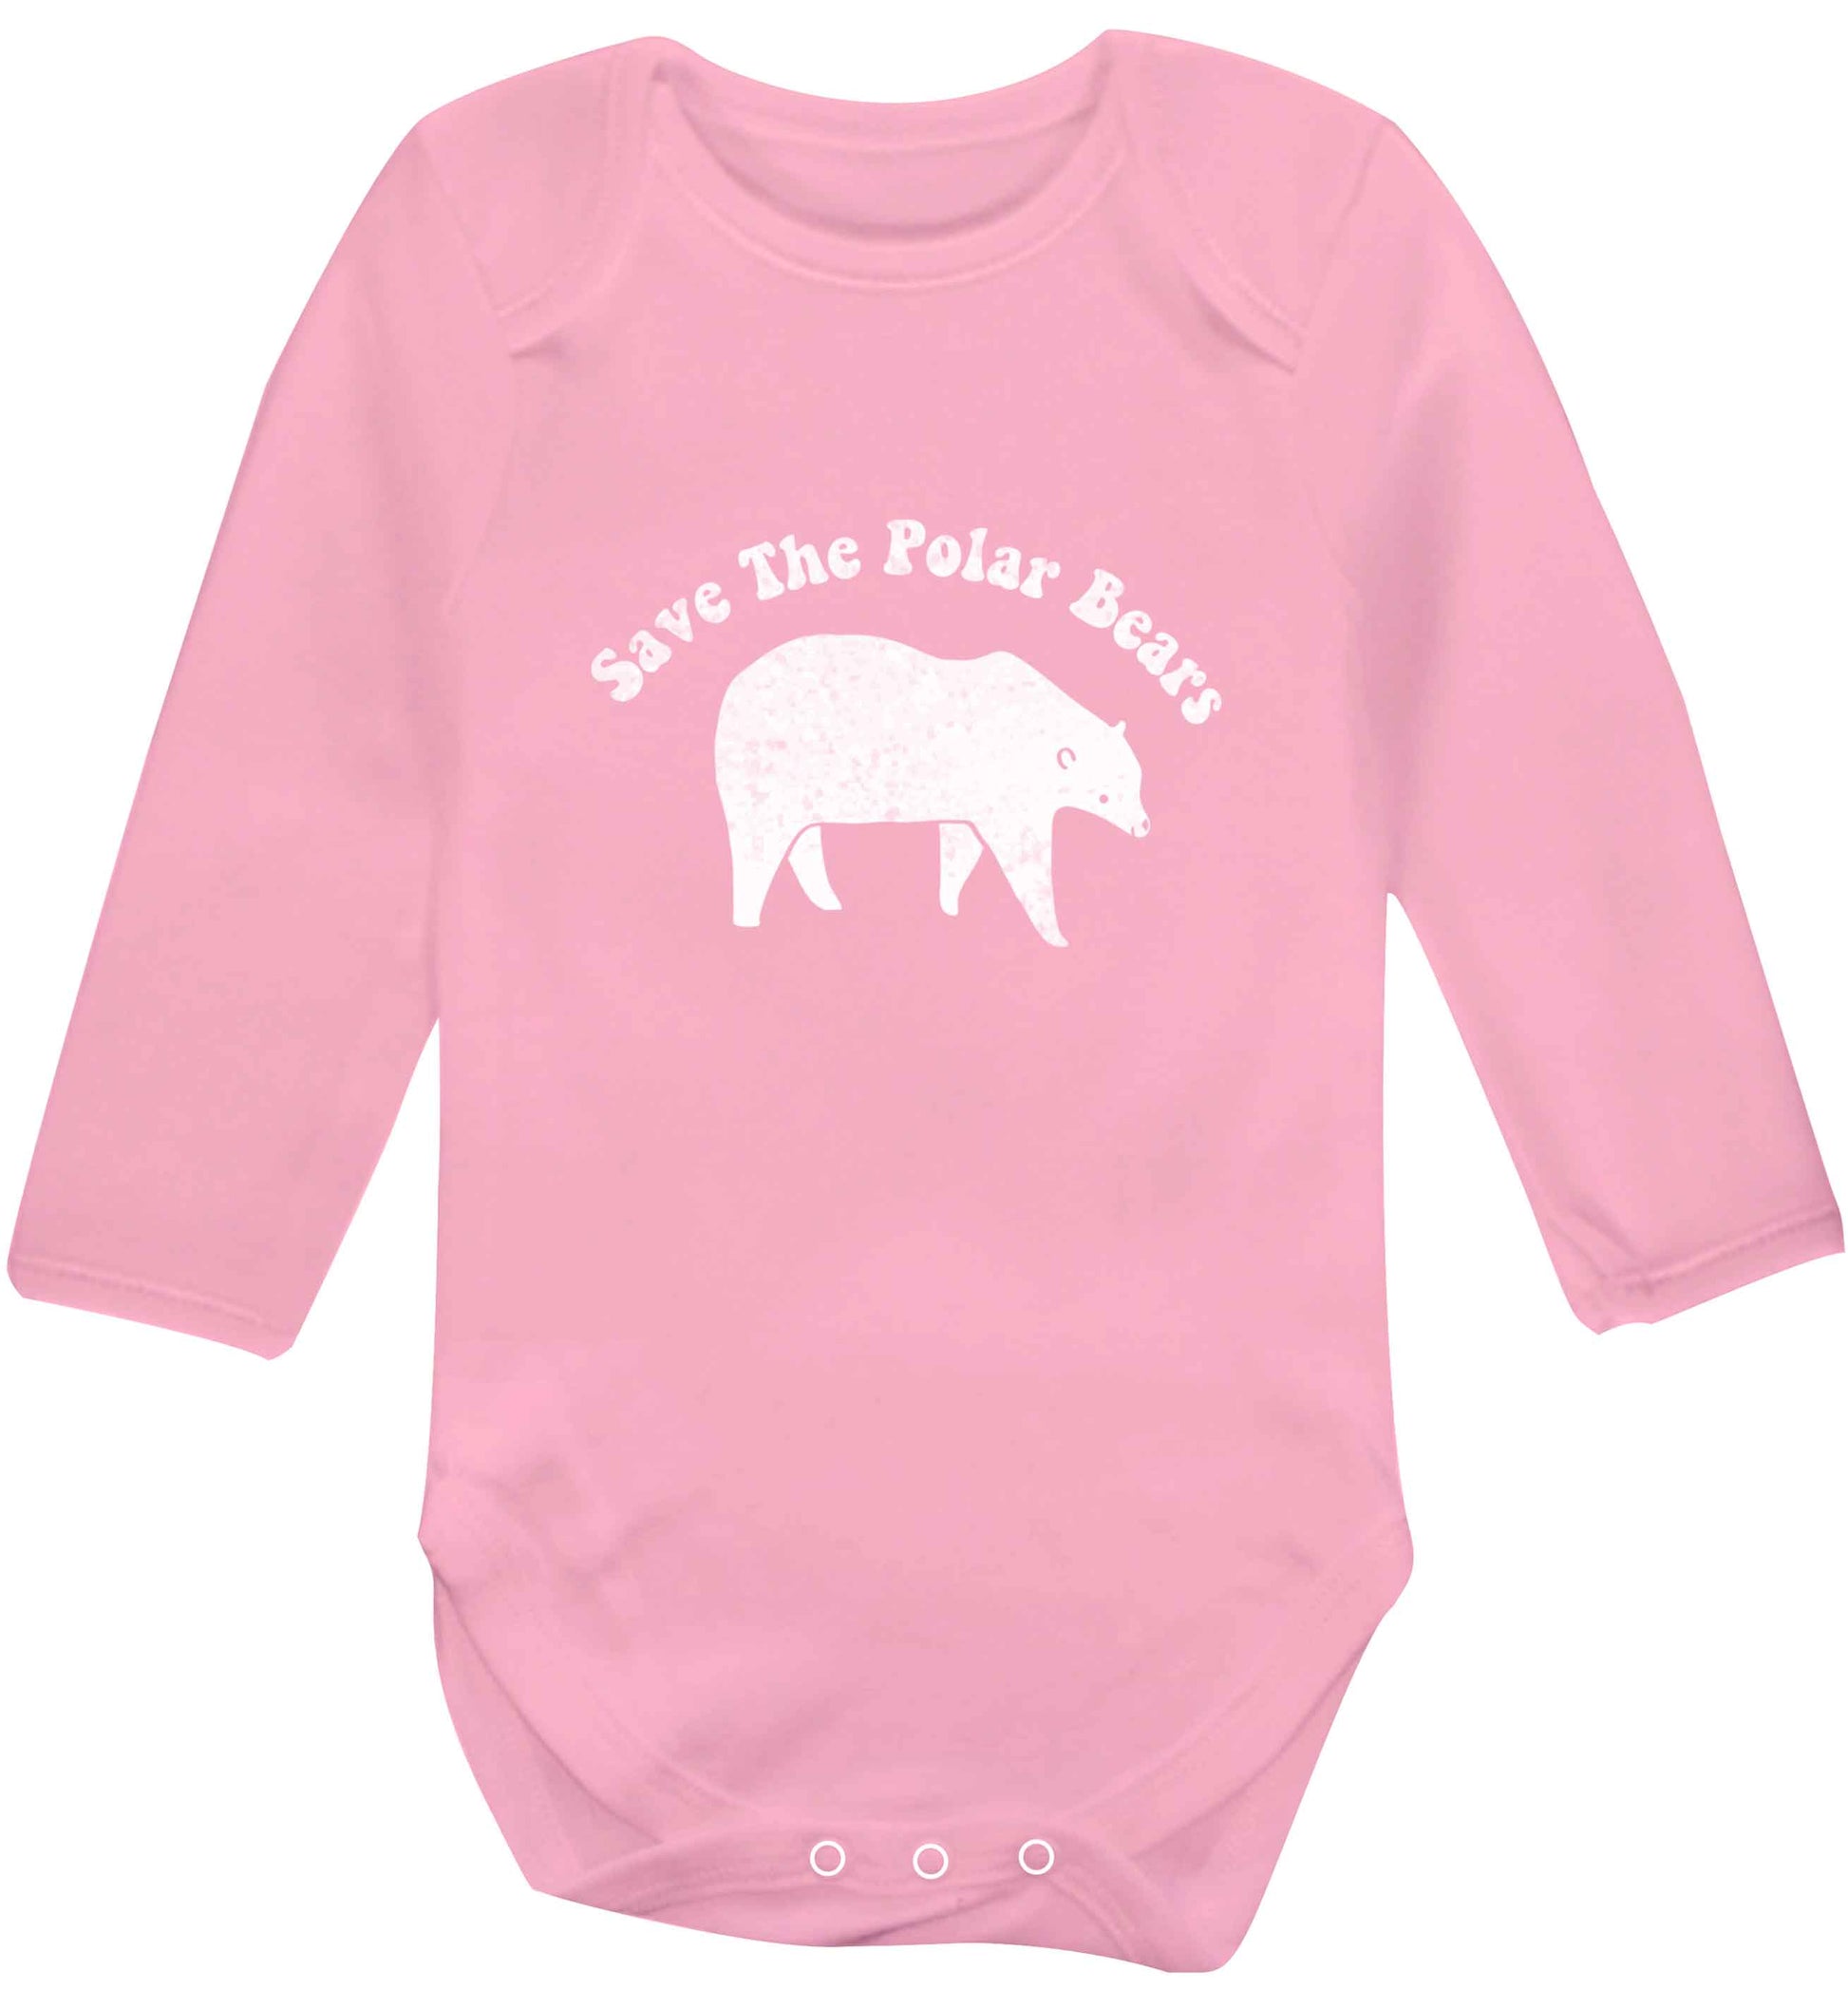 Save The Polar Bears baby vest long sleeved pale pink 6-12 months